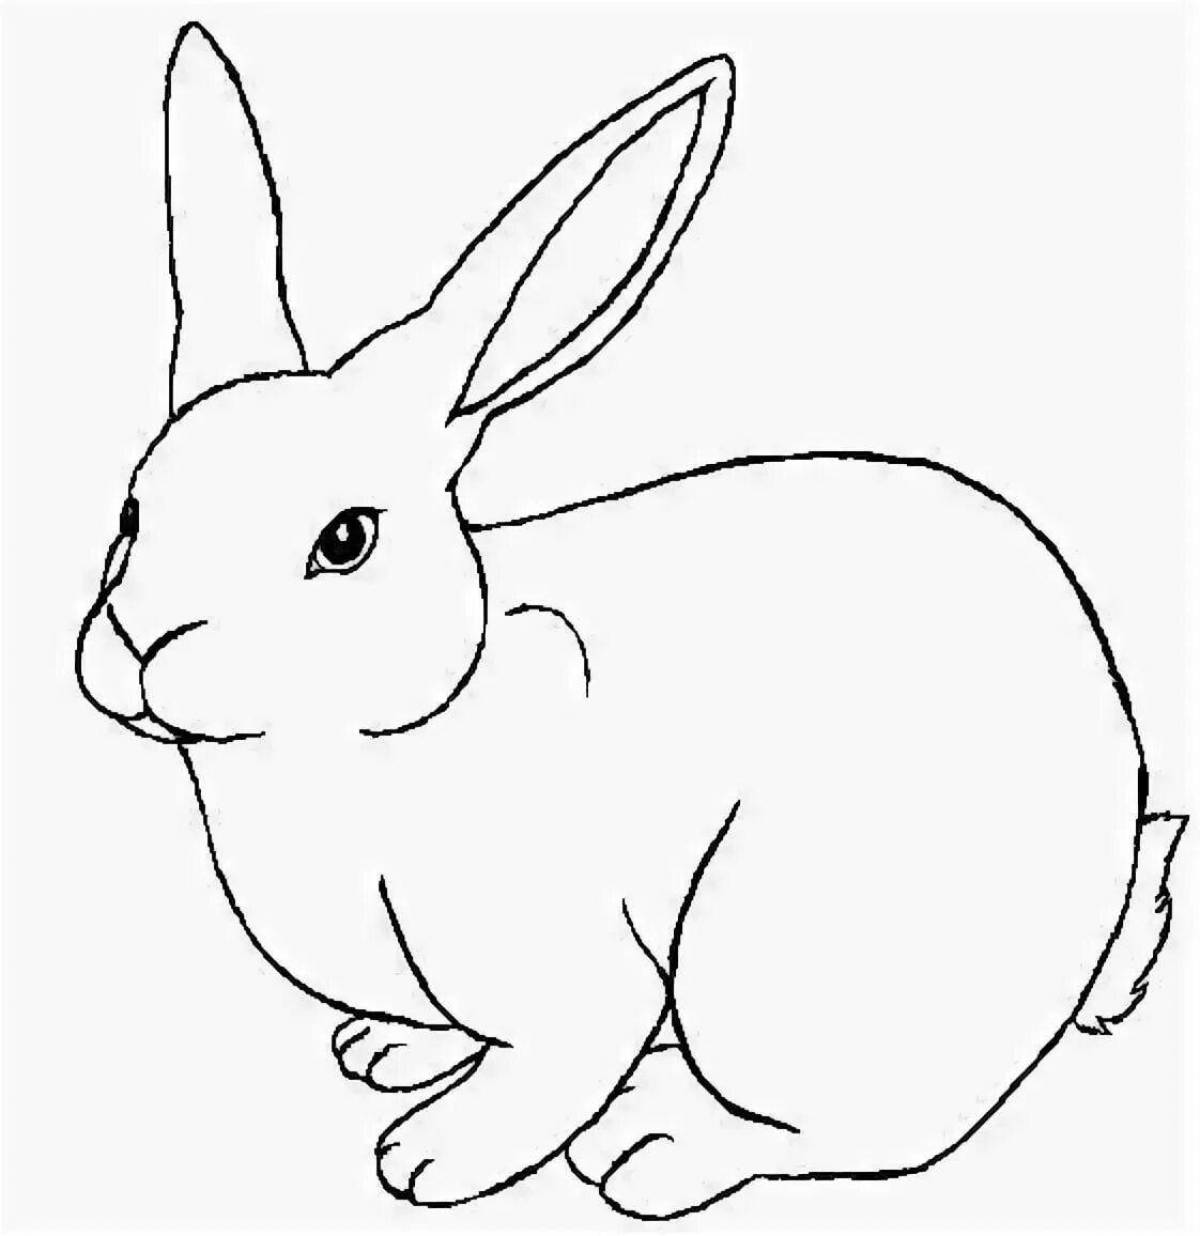 Shiny hare coloring book